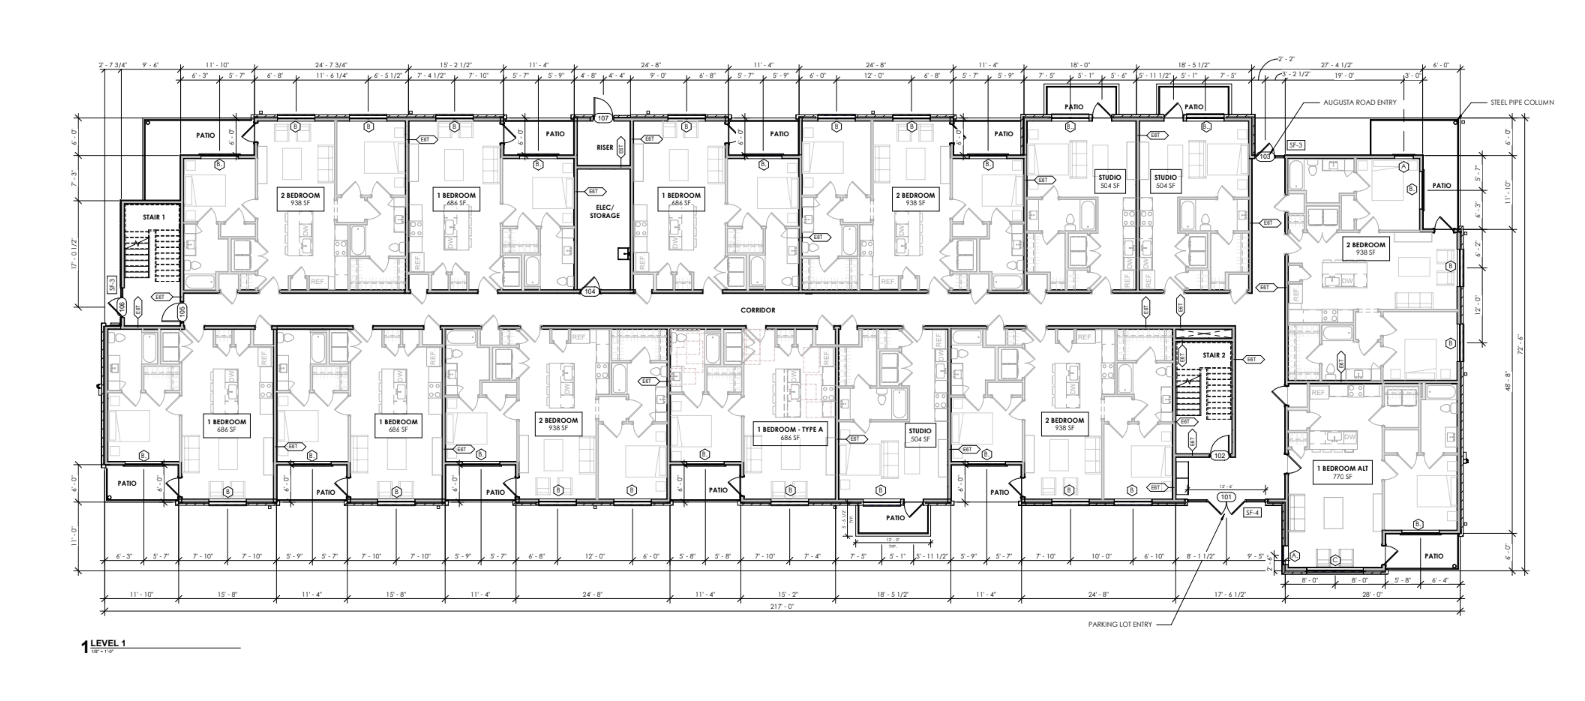 isabel's place floor plan